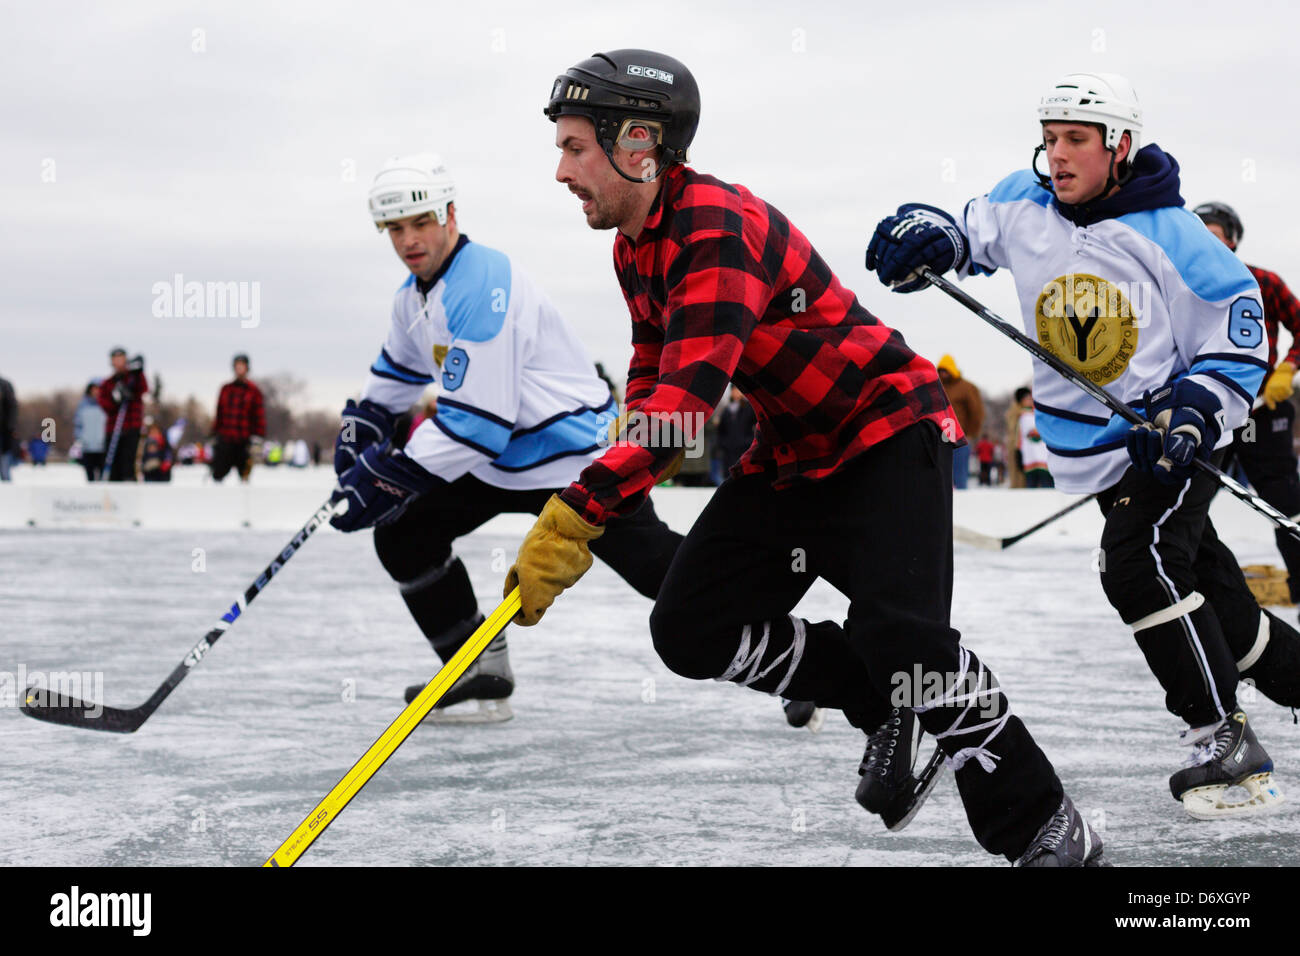 Players compete during a game at the U.S. Pond Hockey Championships on Lake Nokomis on January 19, 2013. Stock Photo